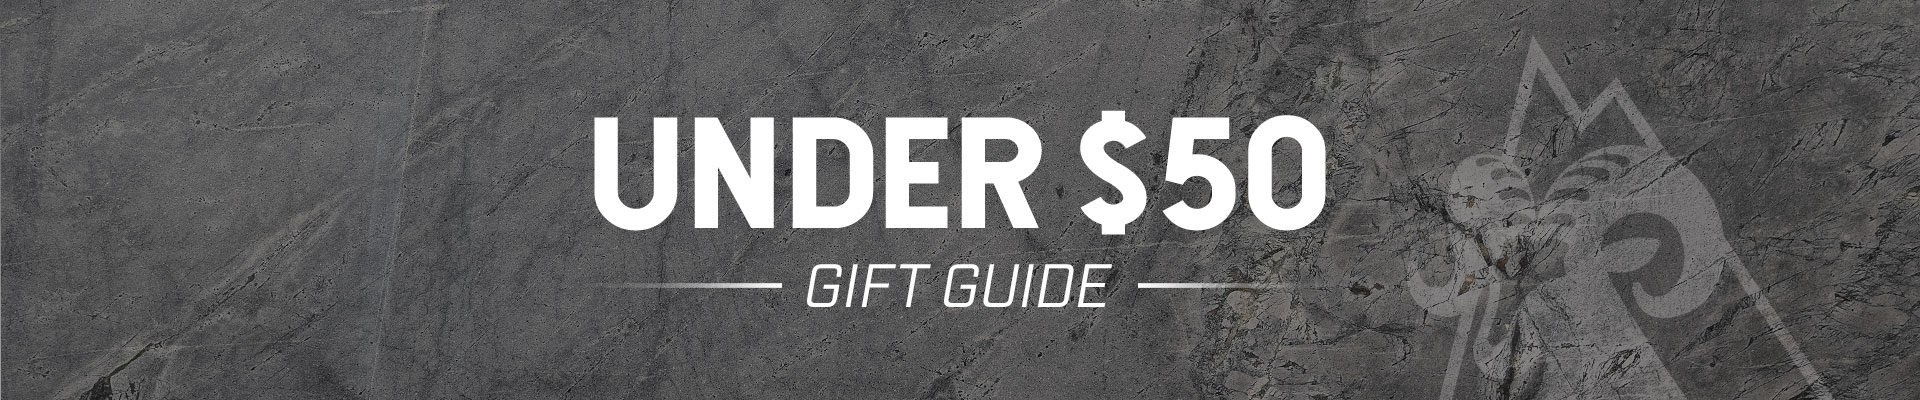 rocky boots gift guide for gifts under $50